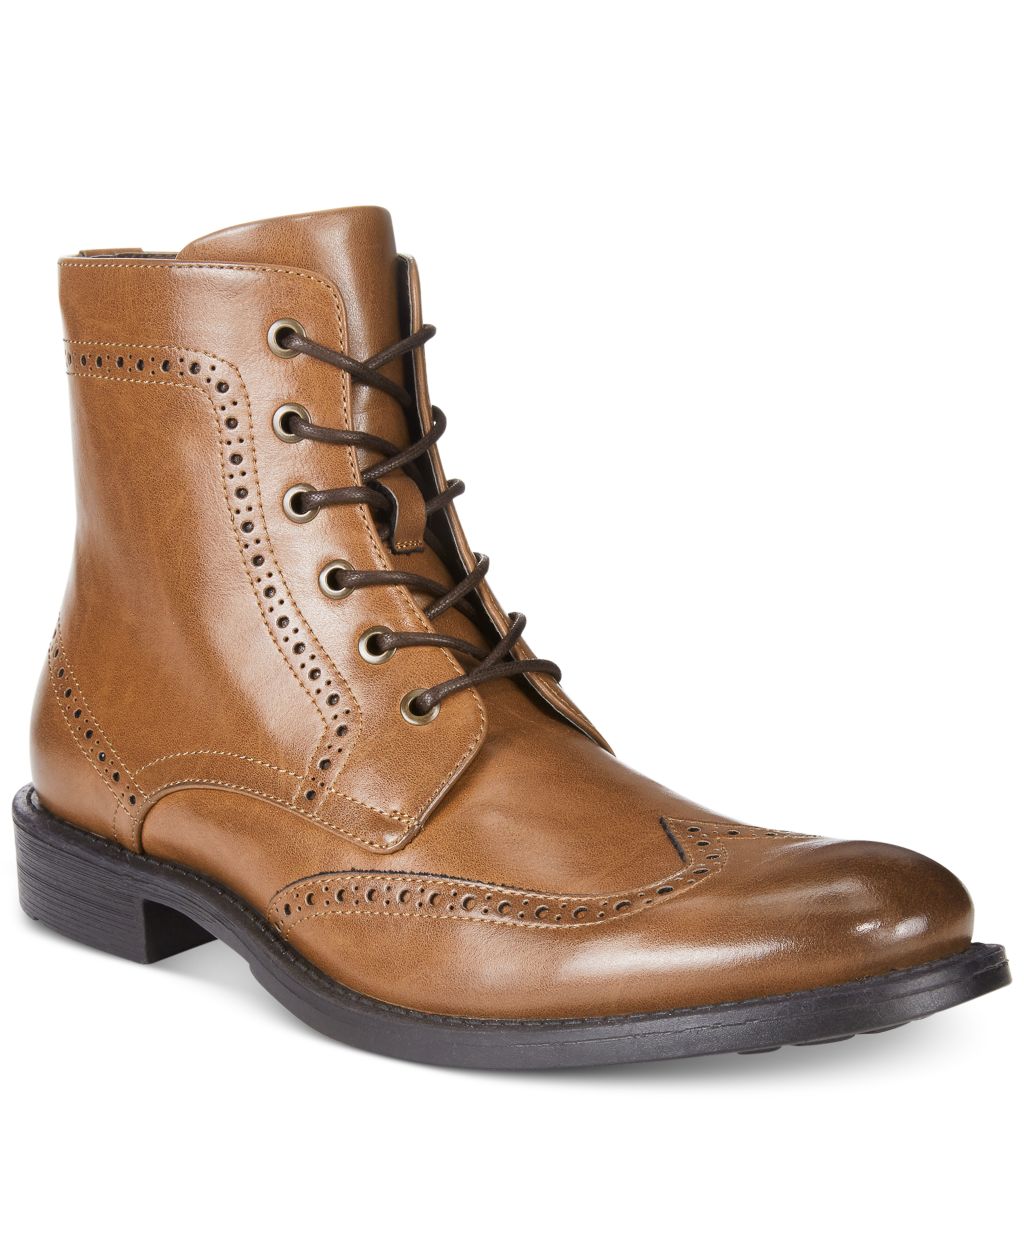 Unlisted Lace-up Closure by Kenneth Cole Men's Blind Sided Wingtip Perforated Boots